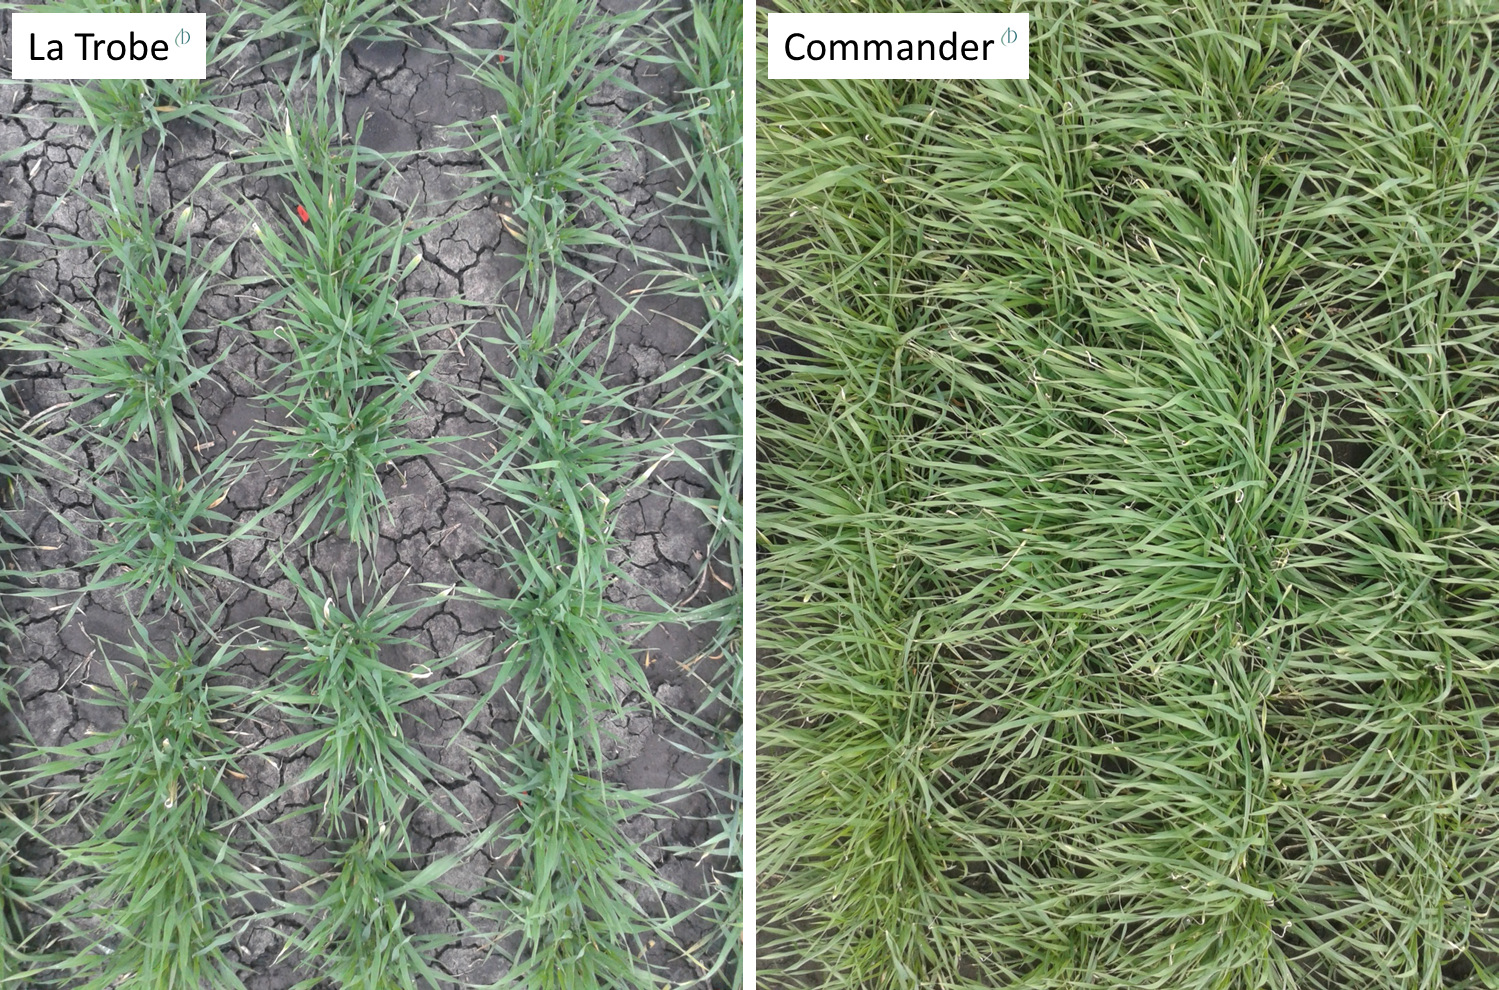 Figure 2. Aerial view captured 25 days after sowing for Australian barley varieties: La Trobe (low early vigour) and Commander (high early vigour).